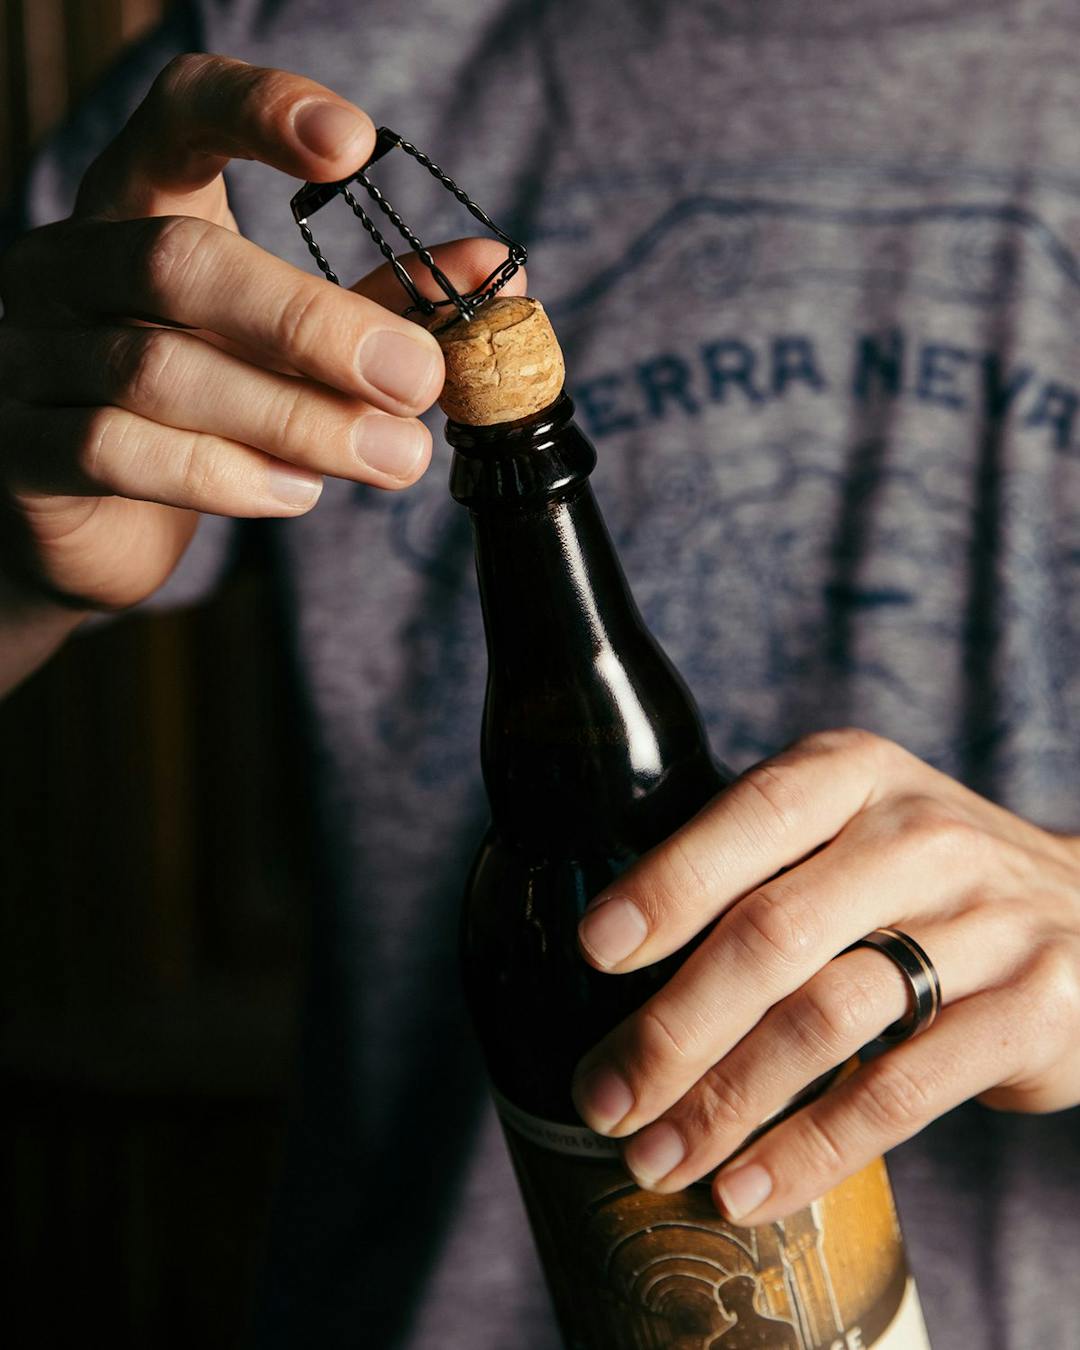 Removing the wire cage on a corked bottle of beer